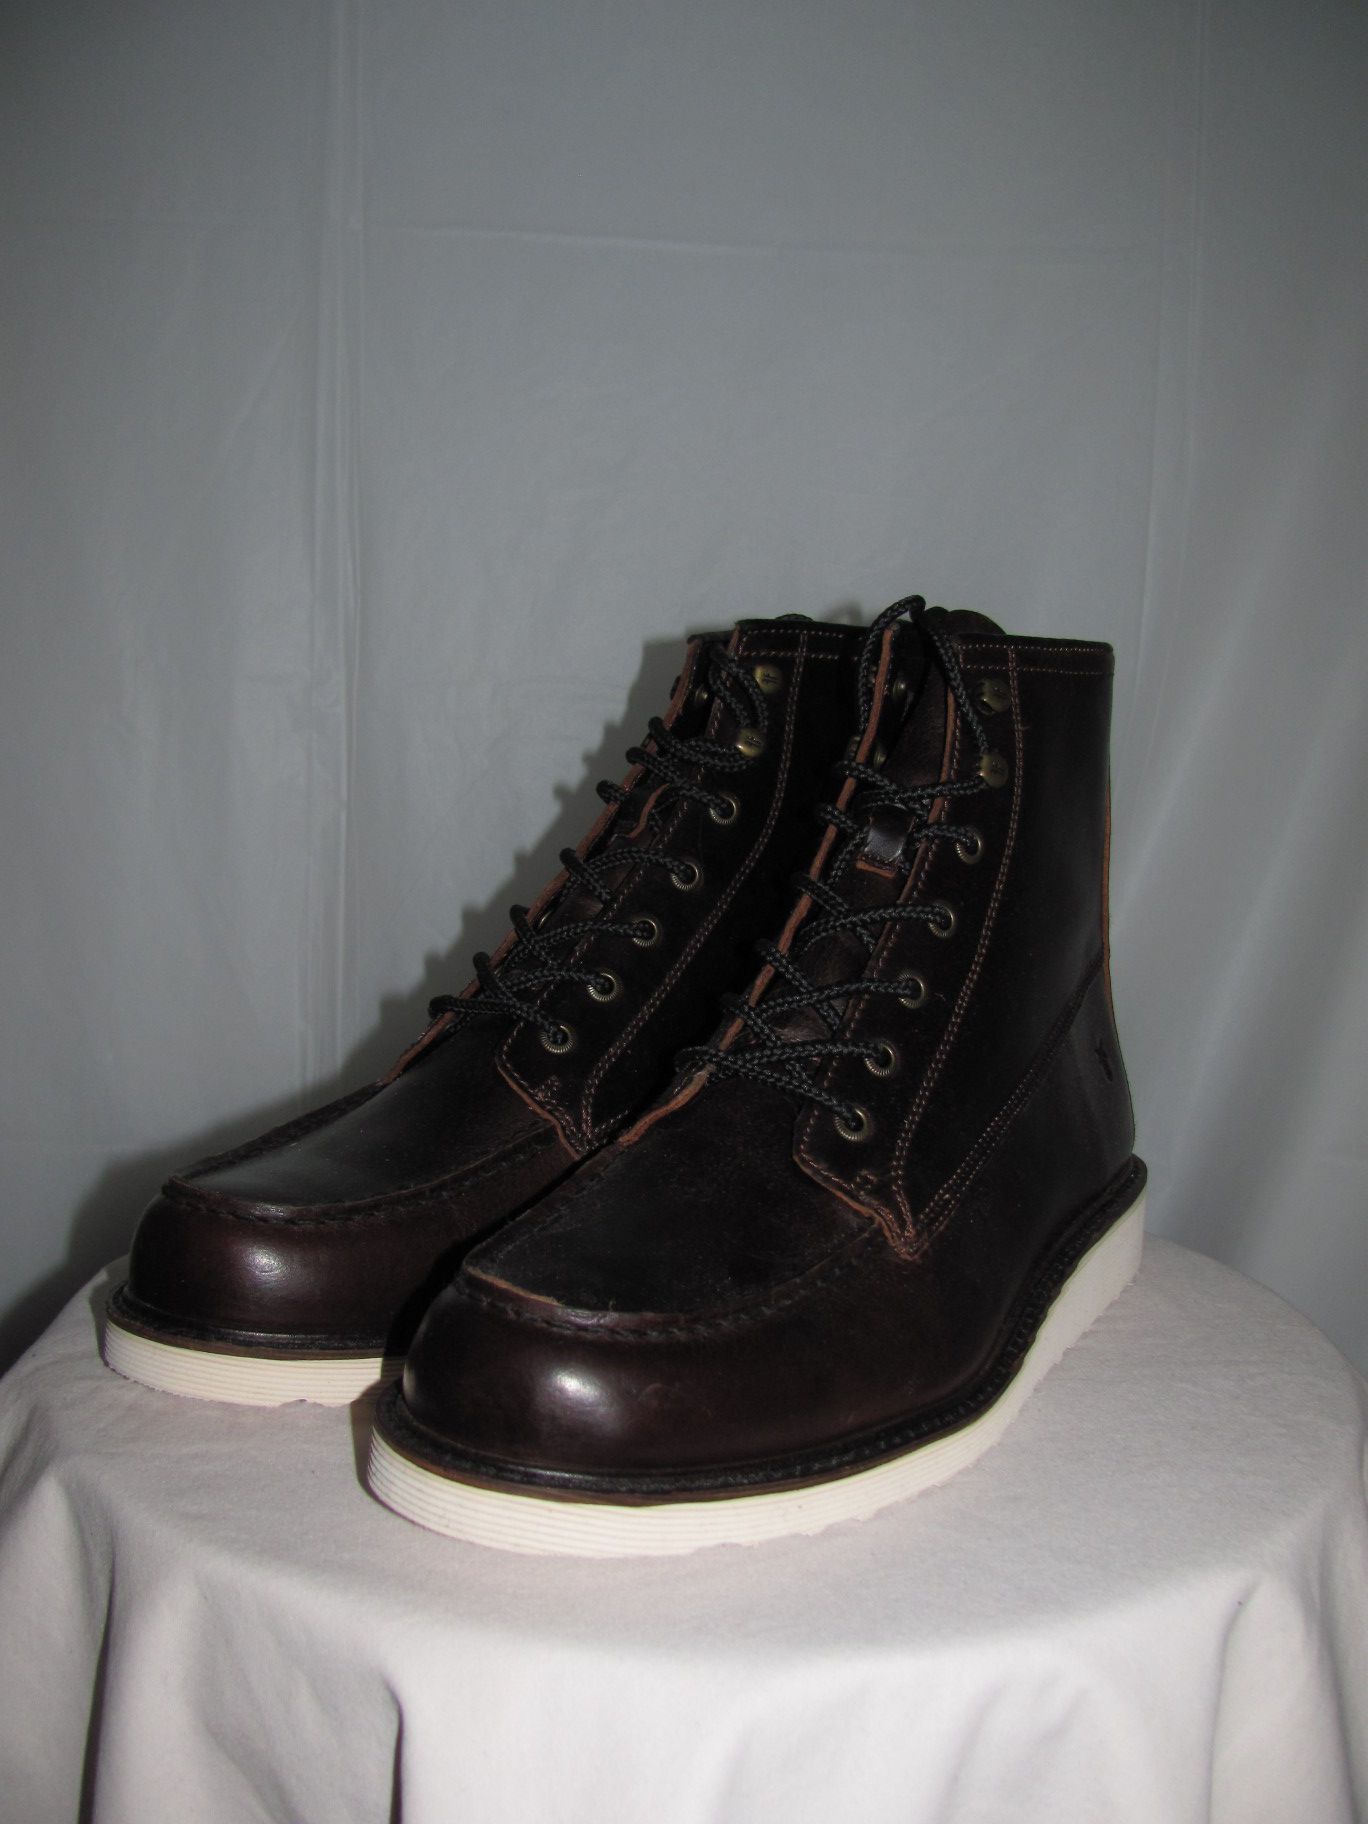 Brand New FRYE Dawson Wedge Brown Leather Work Boots Men's Size 10